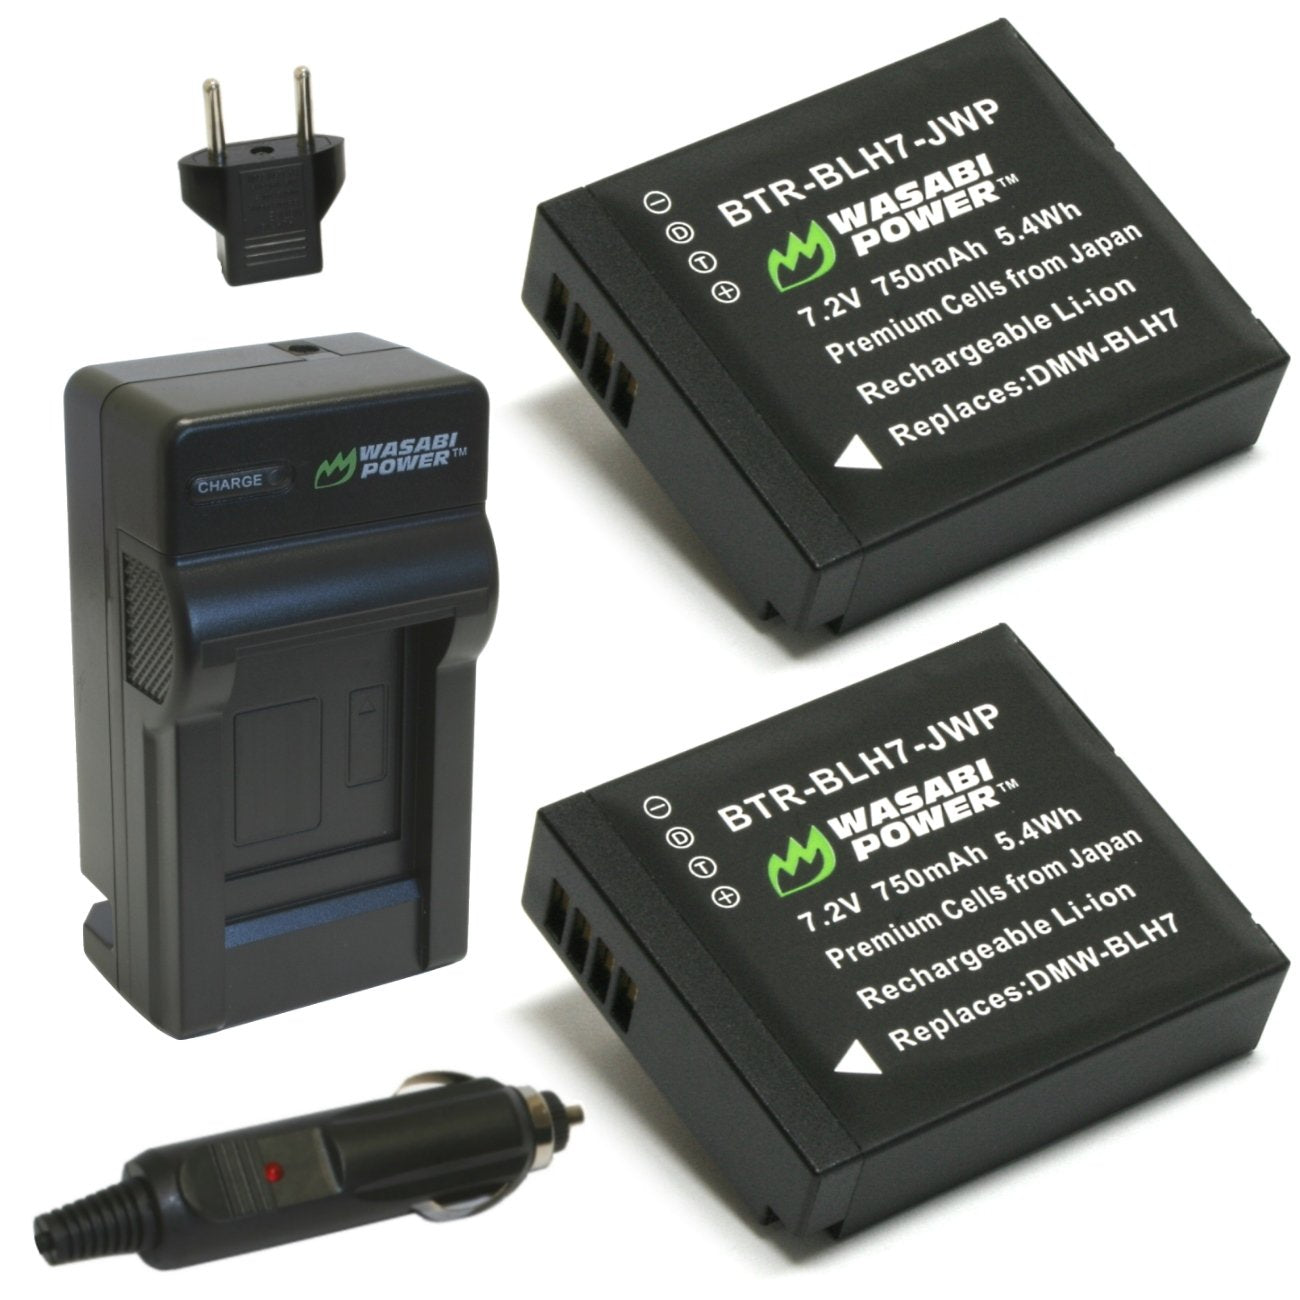 Wasabi Power Battery BMW BLH7 (2-Pack) and Charger for Panasonic DMW-BLH7, DMW-BLH7E, DMW-BLH7PP (Compatible with Panasonic Lumix DC-GX850, DMC-GM1, DMC-GF7, DMC-LX10)